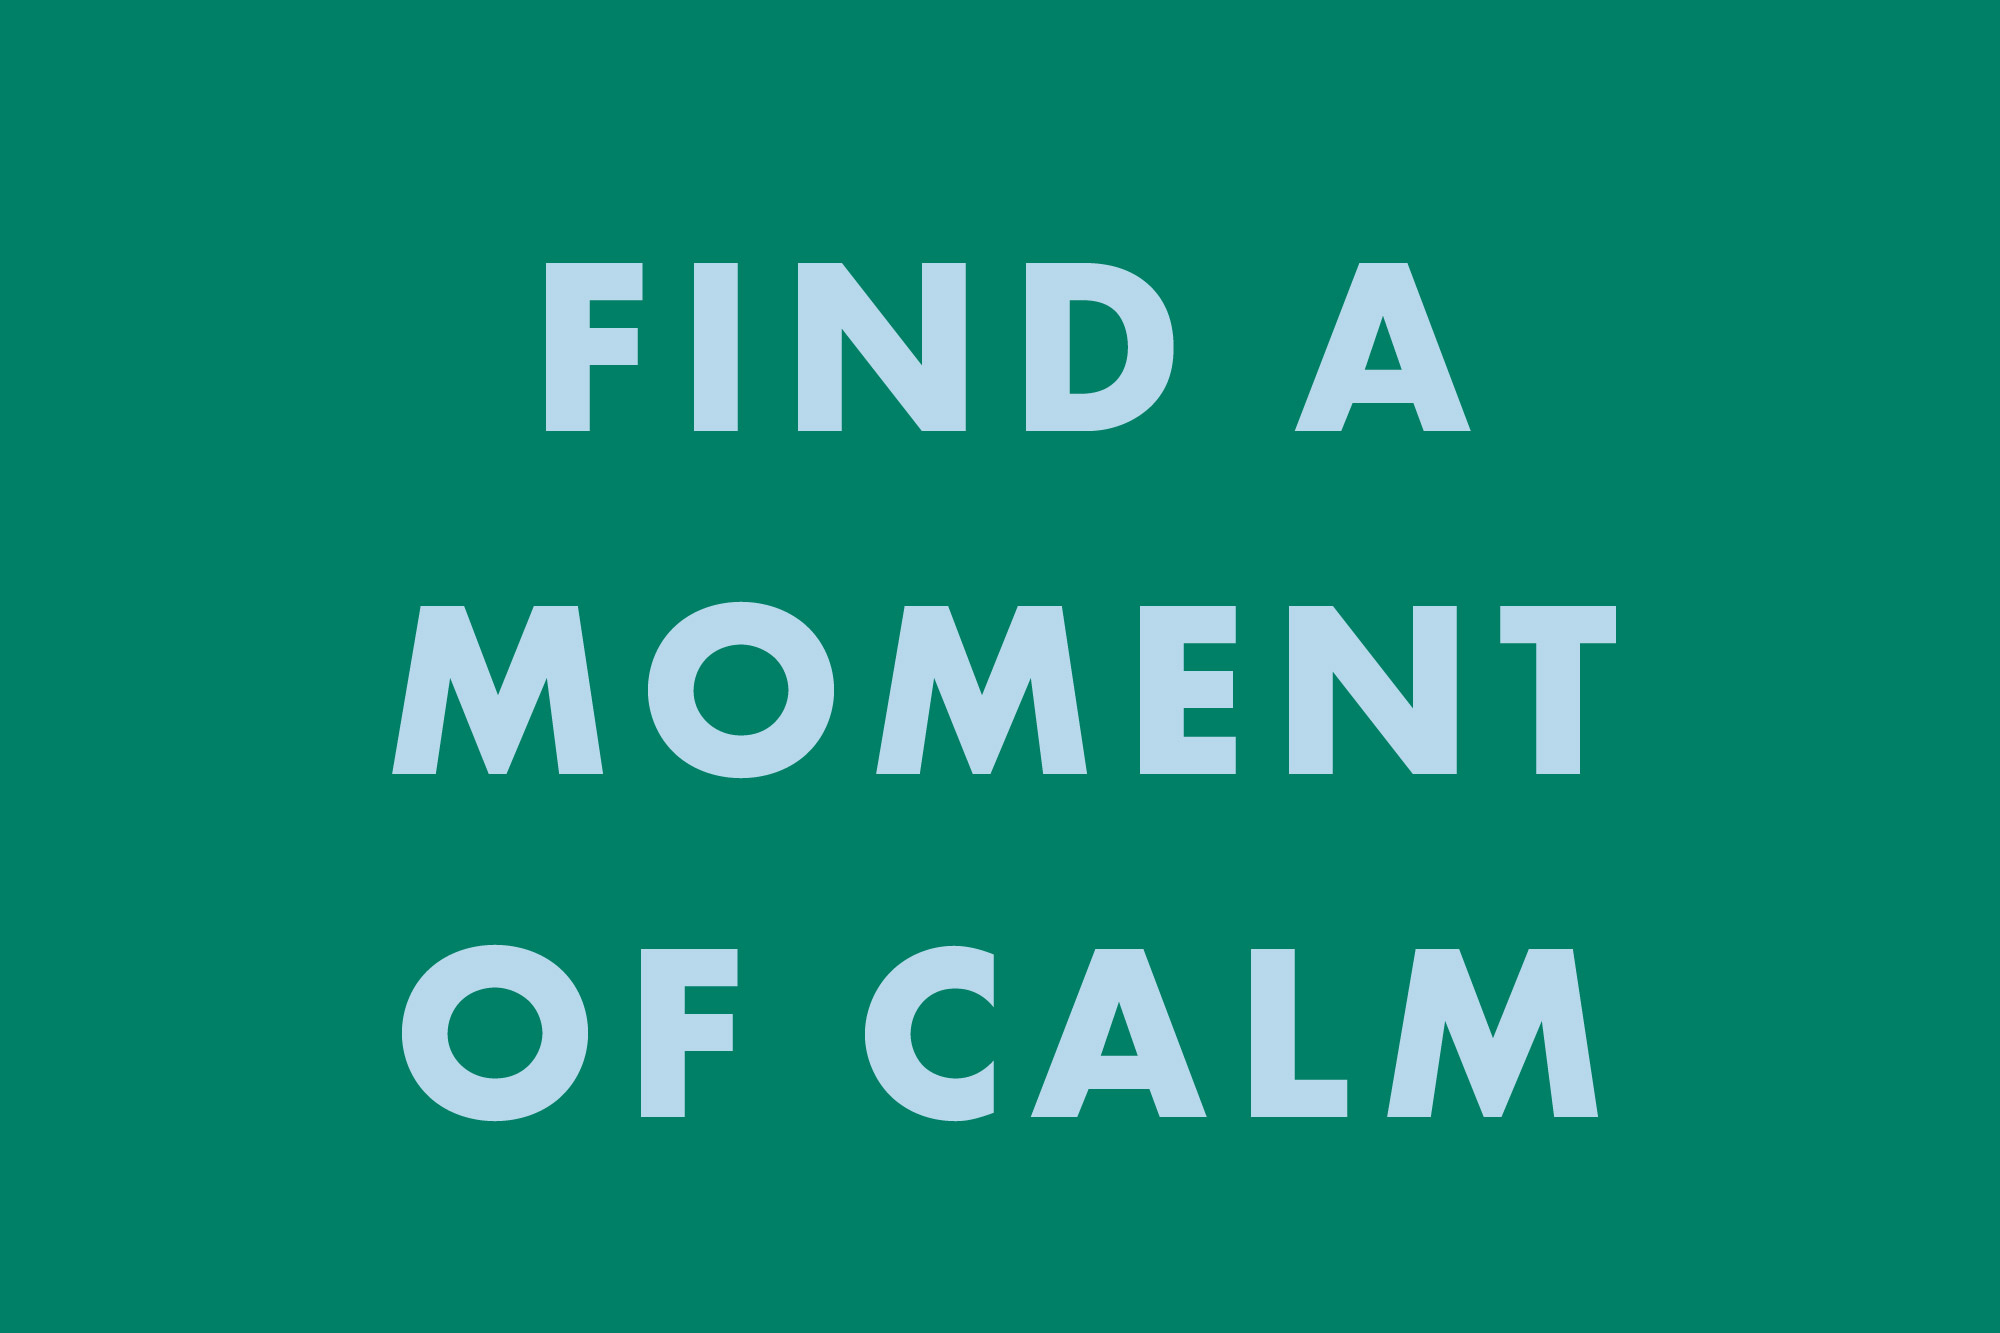 find a moment of calm text